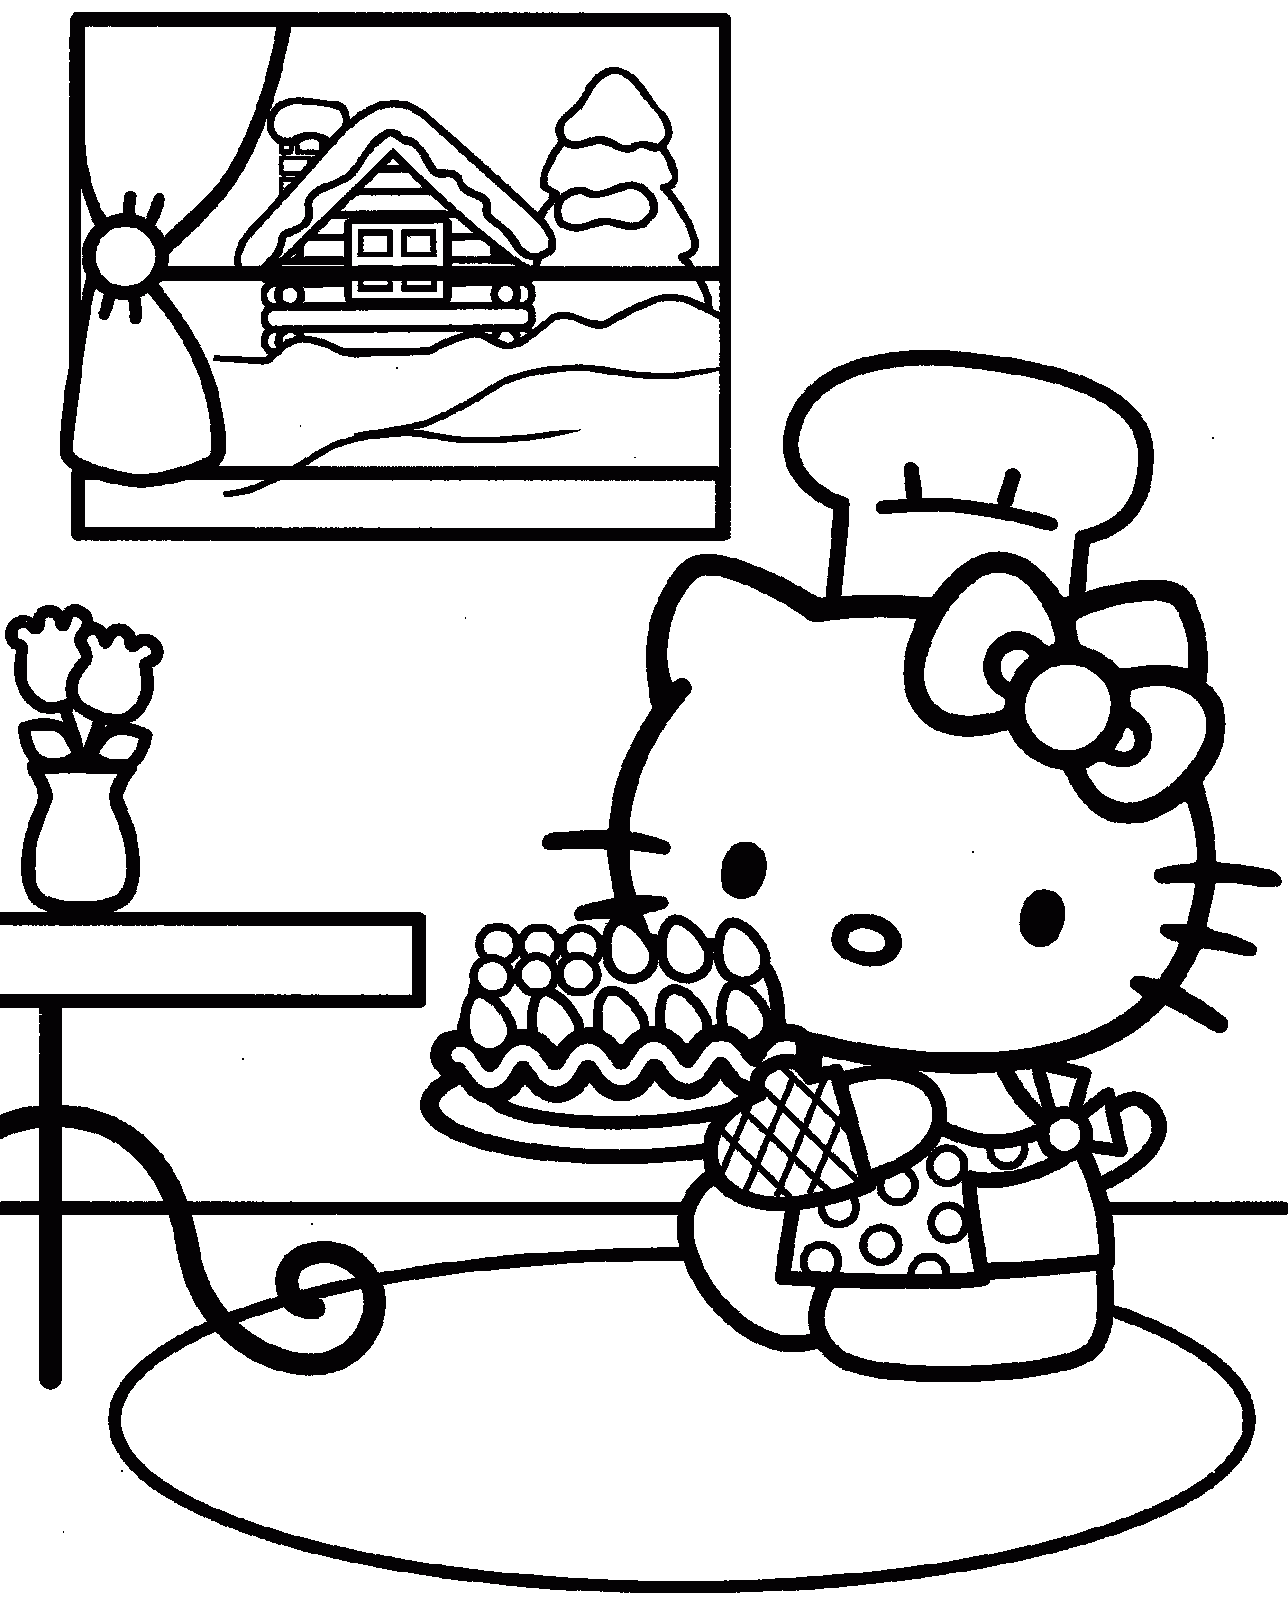 hello kitty coloring pages free free coloring pages hello kitty coloring pages hello coloring hello free pages kitty 